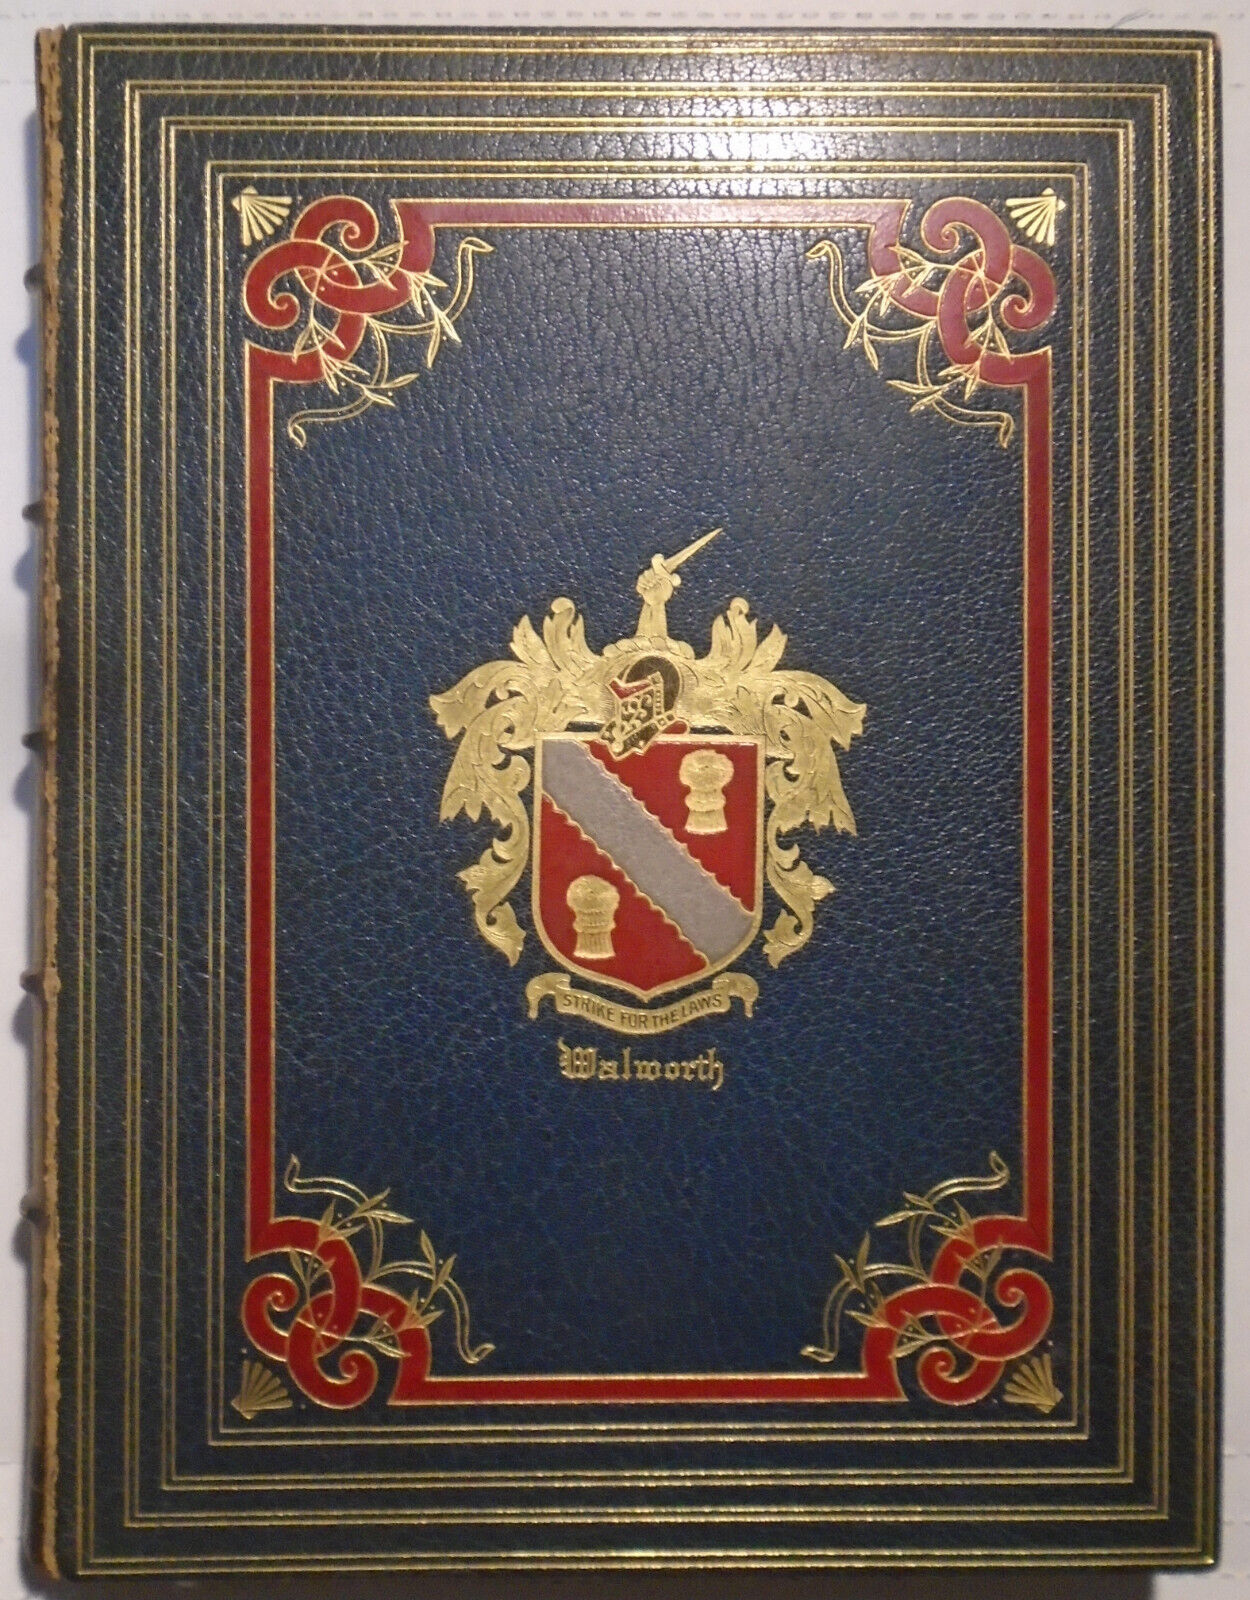 Walworth, Race and allied families: armorial, genealogical and biographical 1930